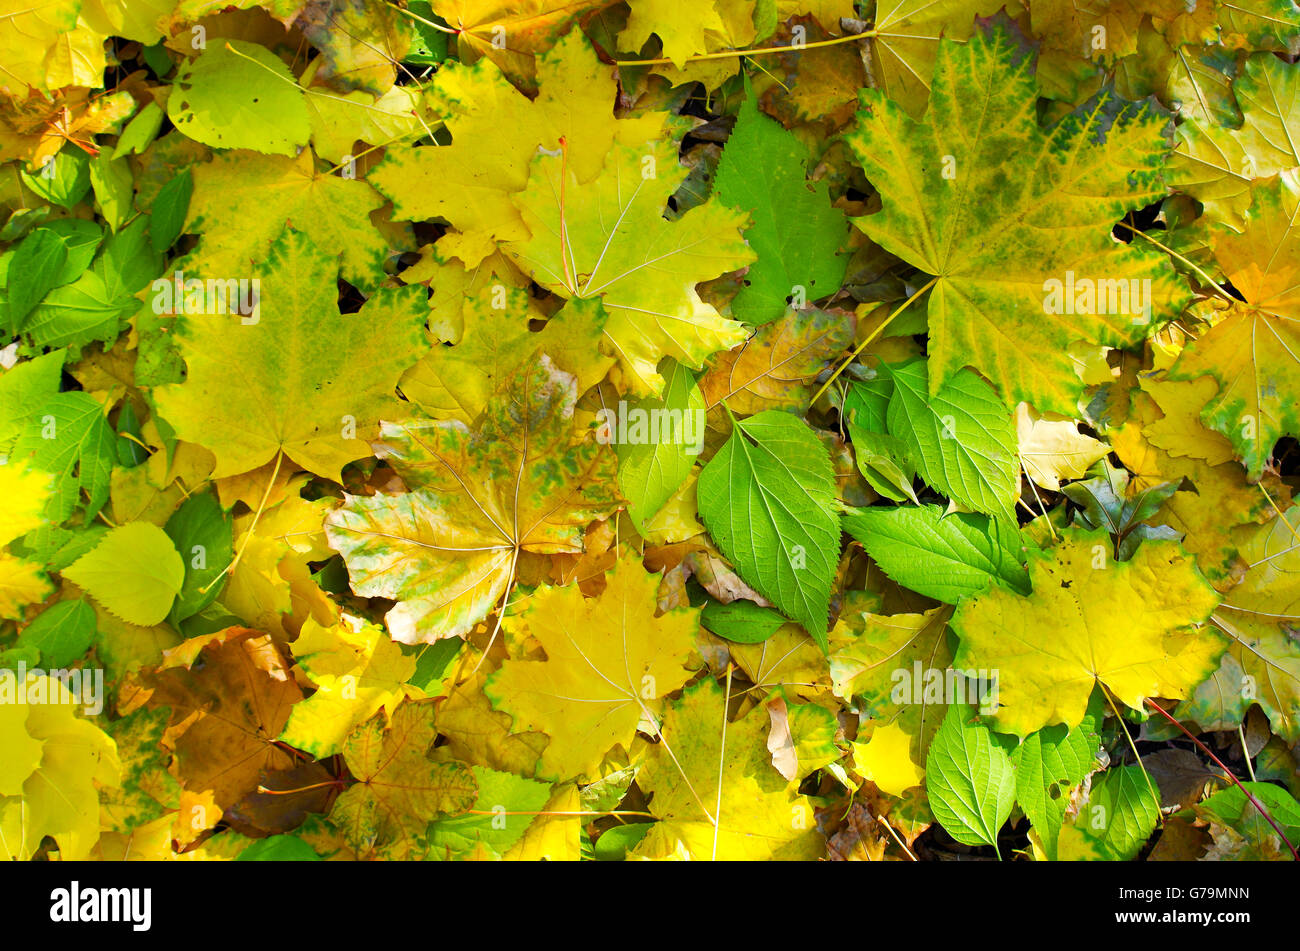 Top view of a bright yellow and green leaves on the lawn after leaf fall for use as a background Stock Photo